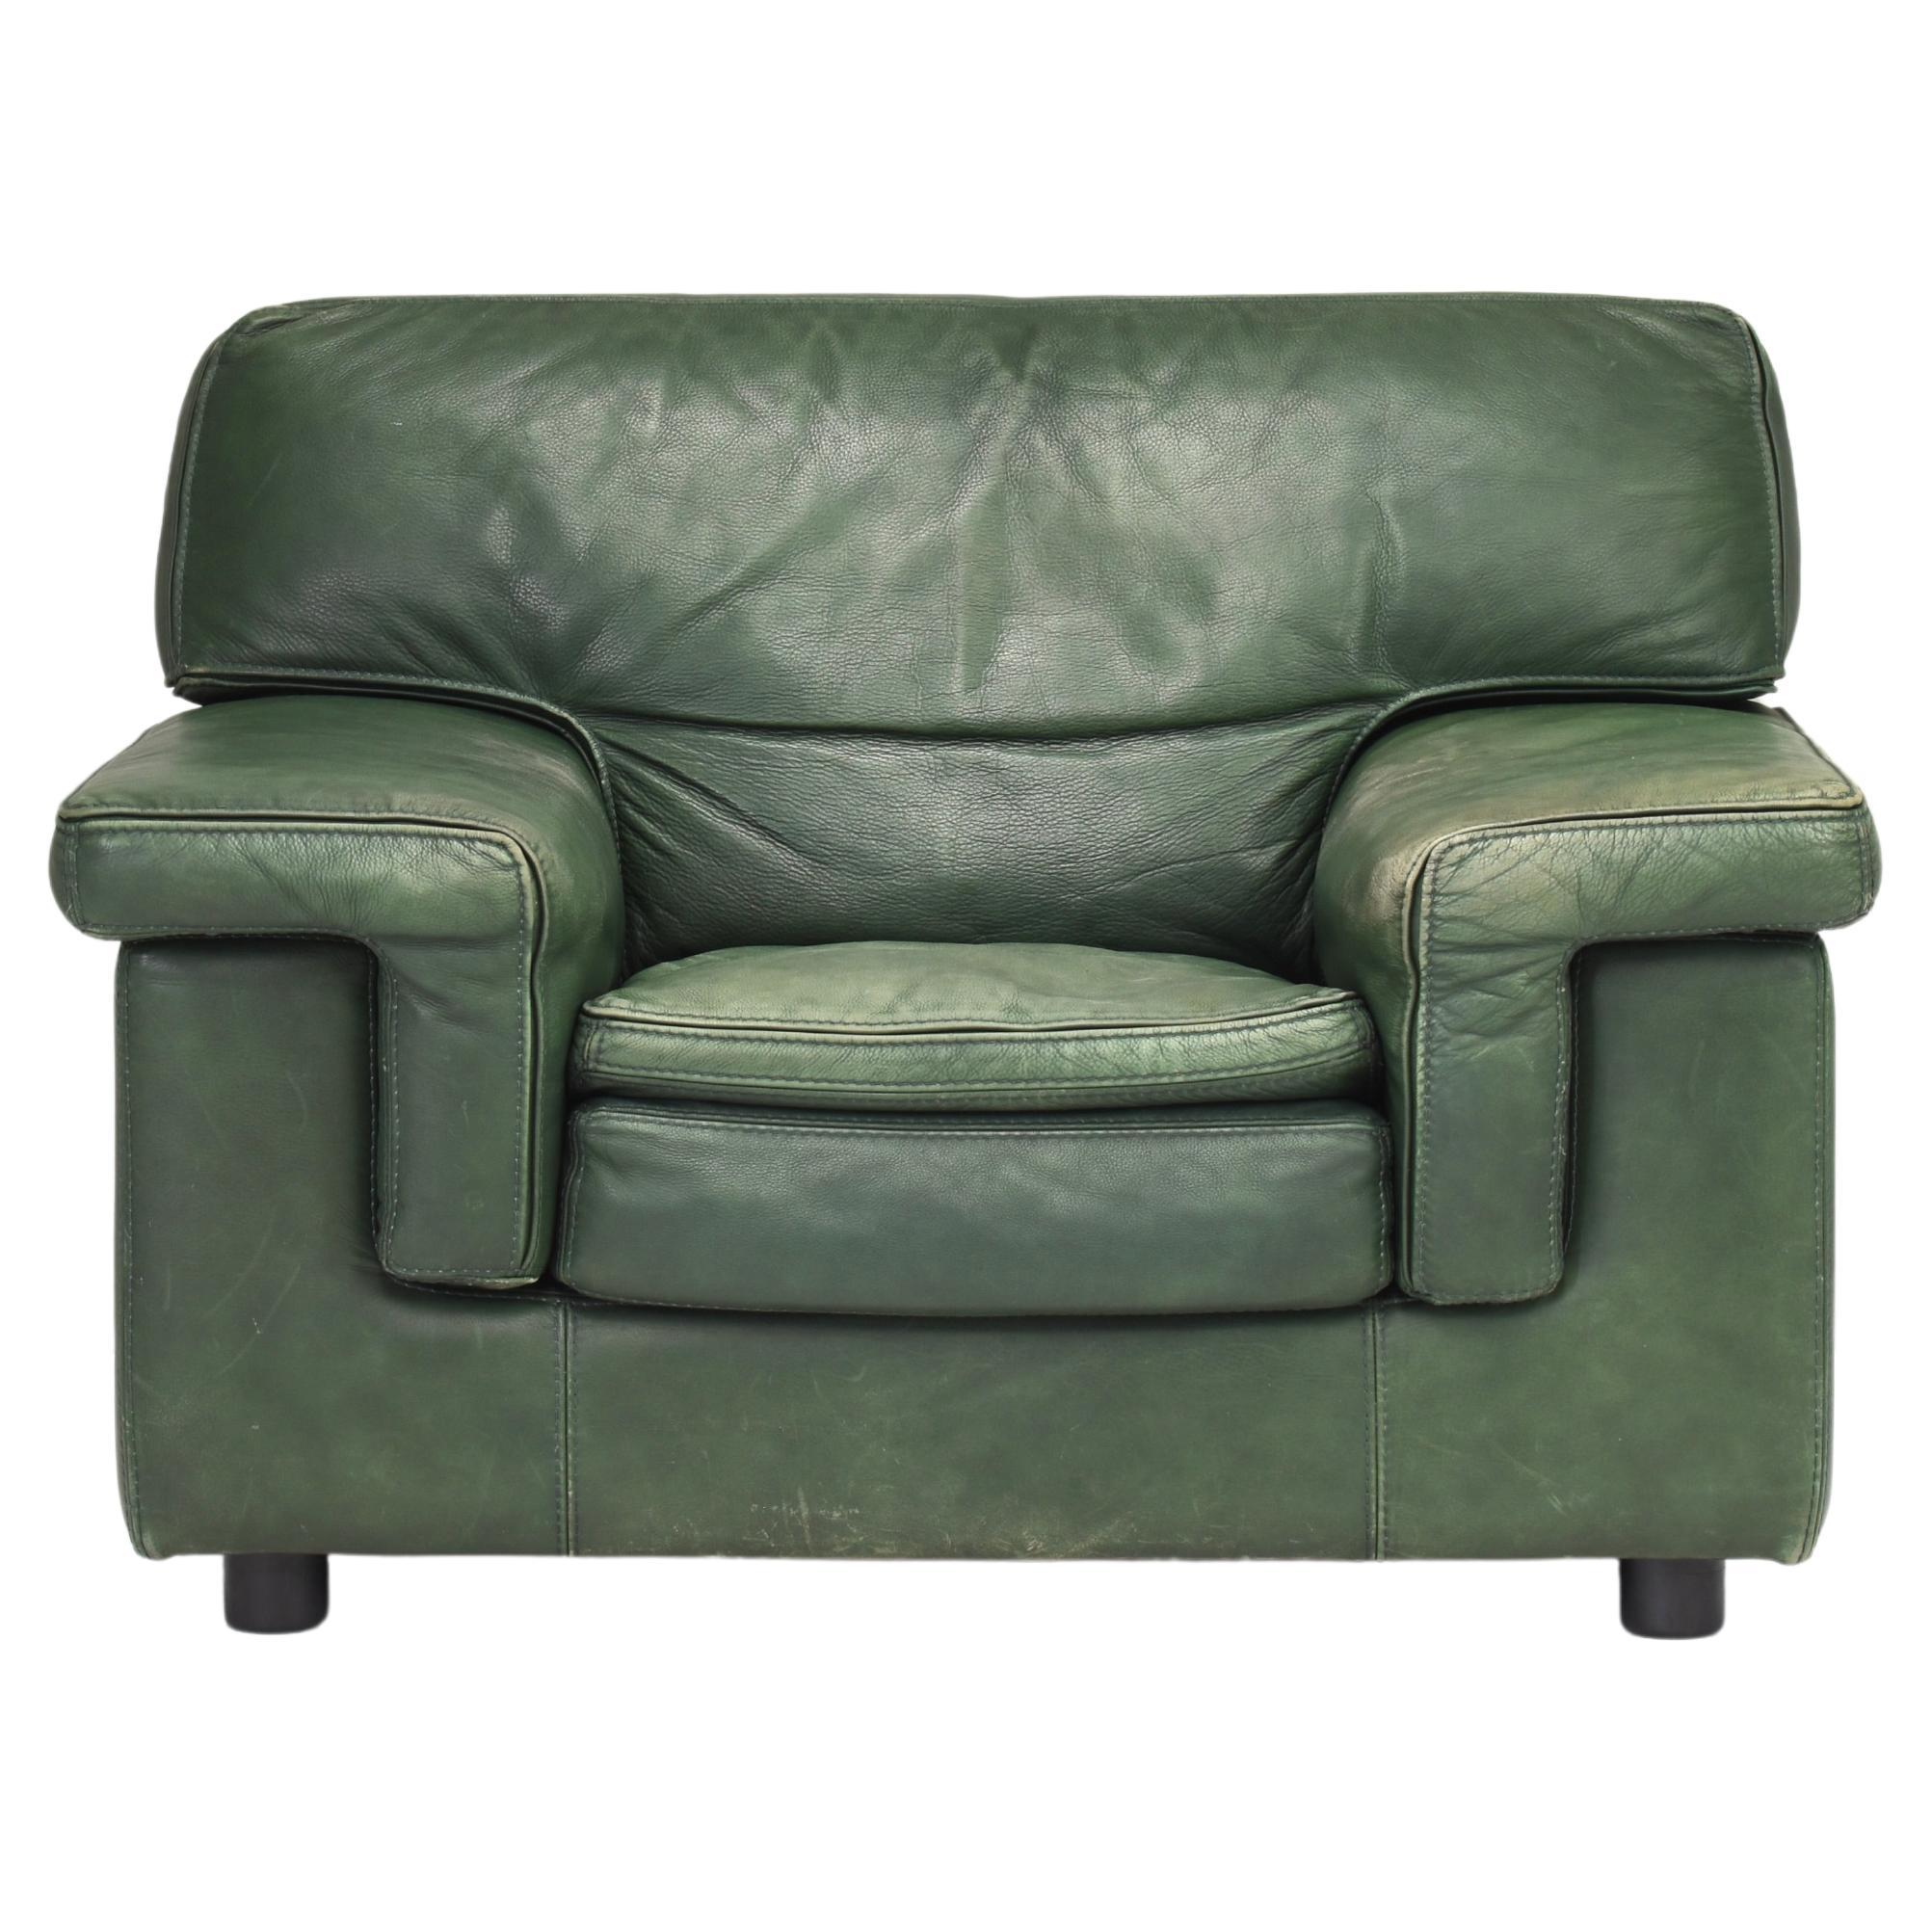 Roche Bobois Lounge Armchair in Original Green Patinated Leather – circa 1970 For Sale